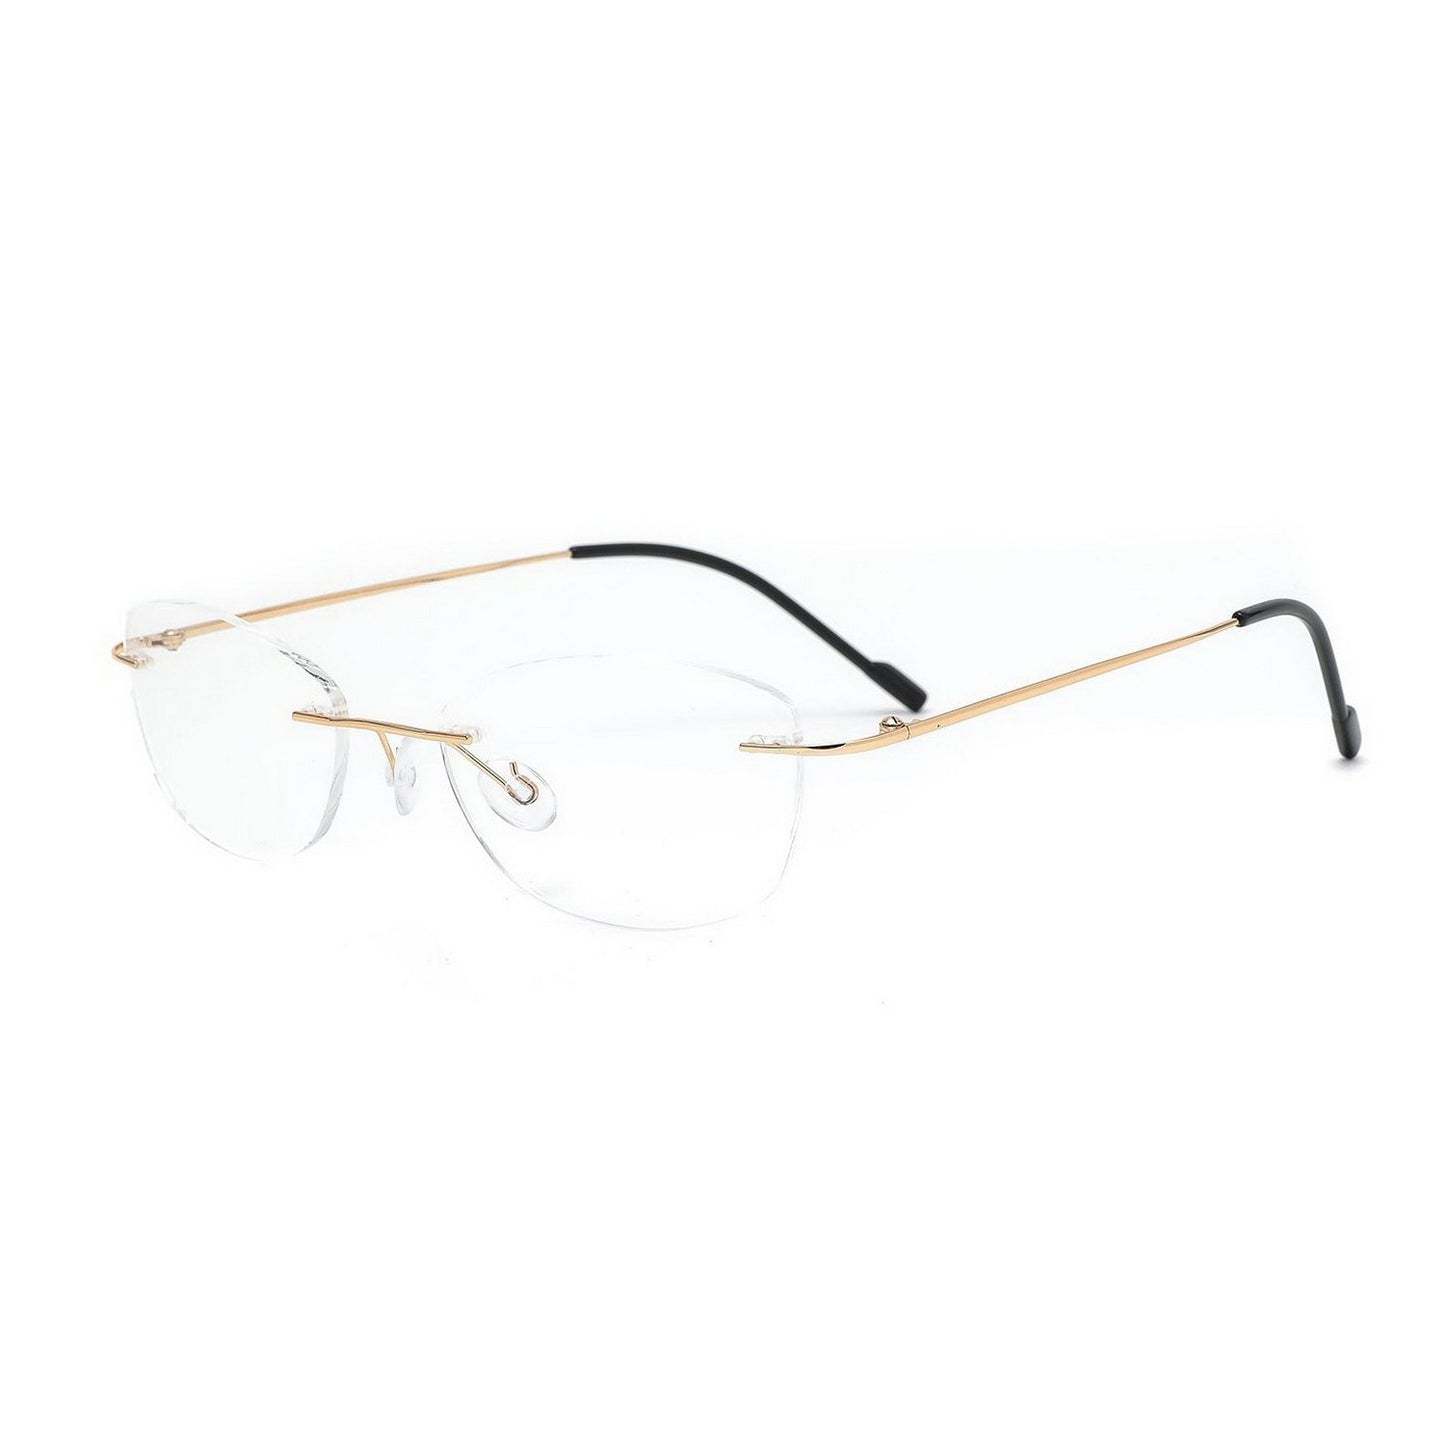 Chic & Fashionable Cat Eye Spectacle Frames